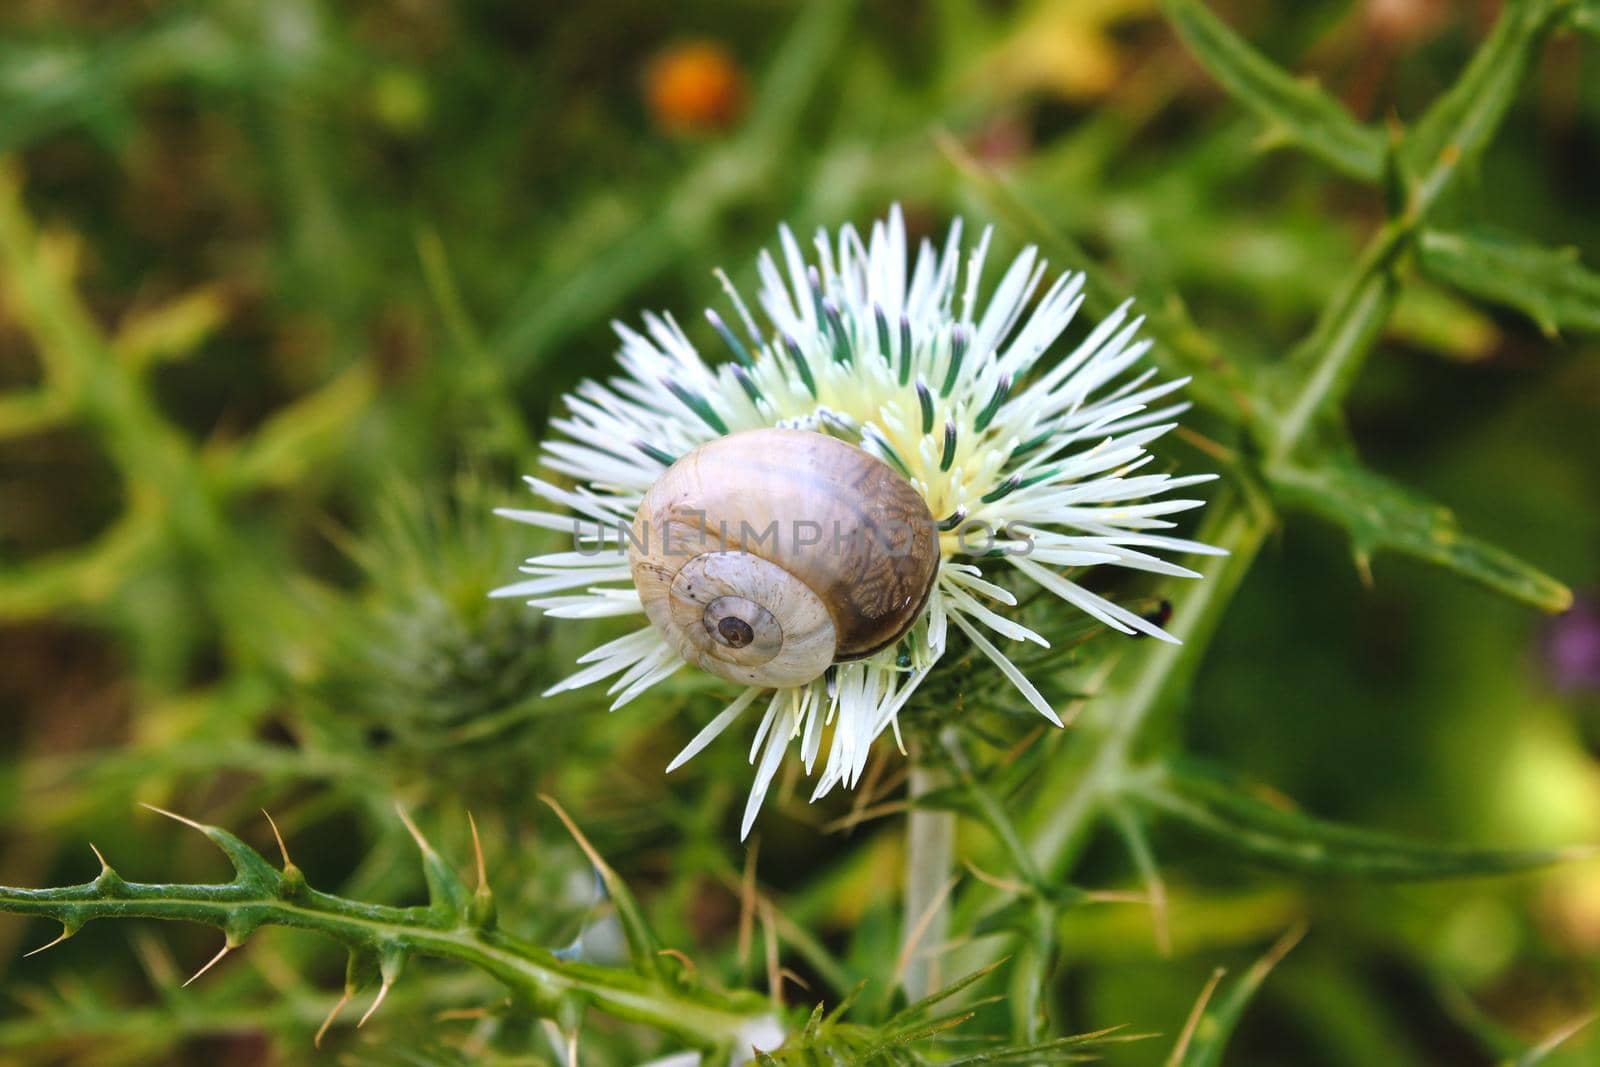 White shell snail perched on a flower in the countryside with a green foliage background